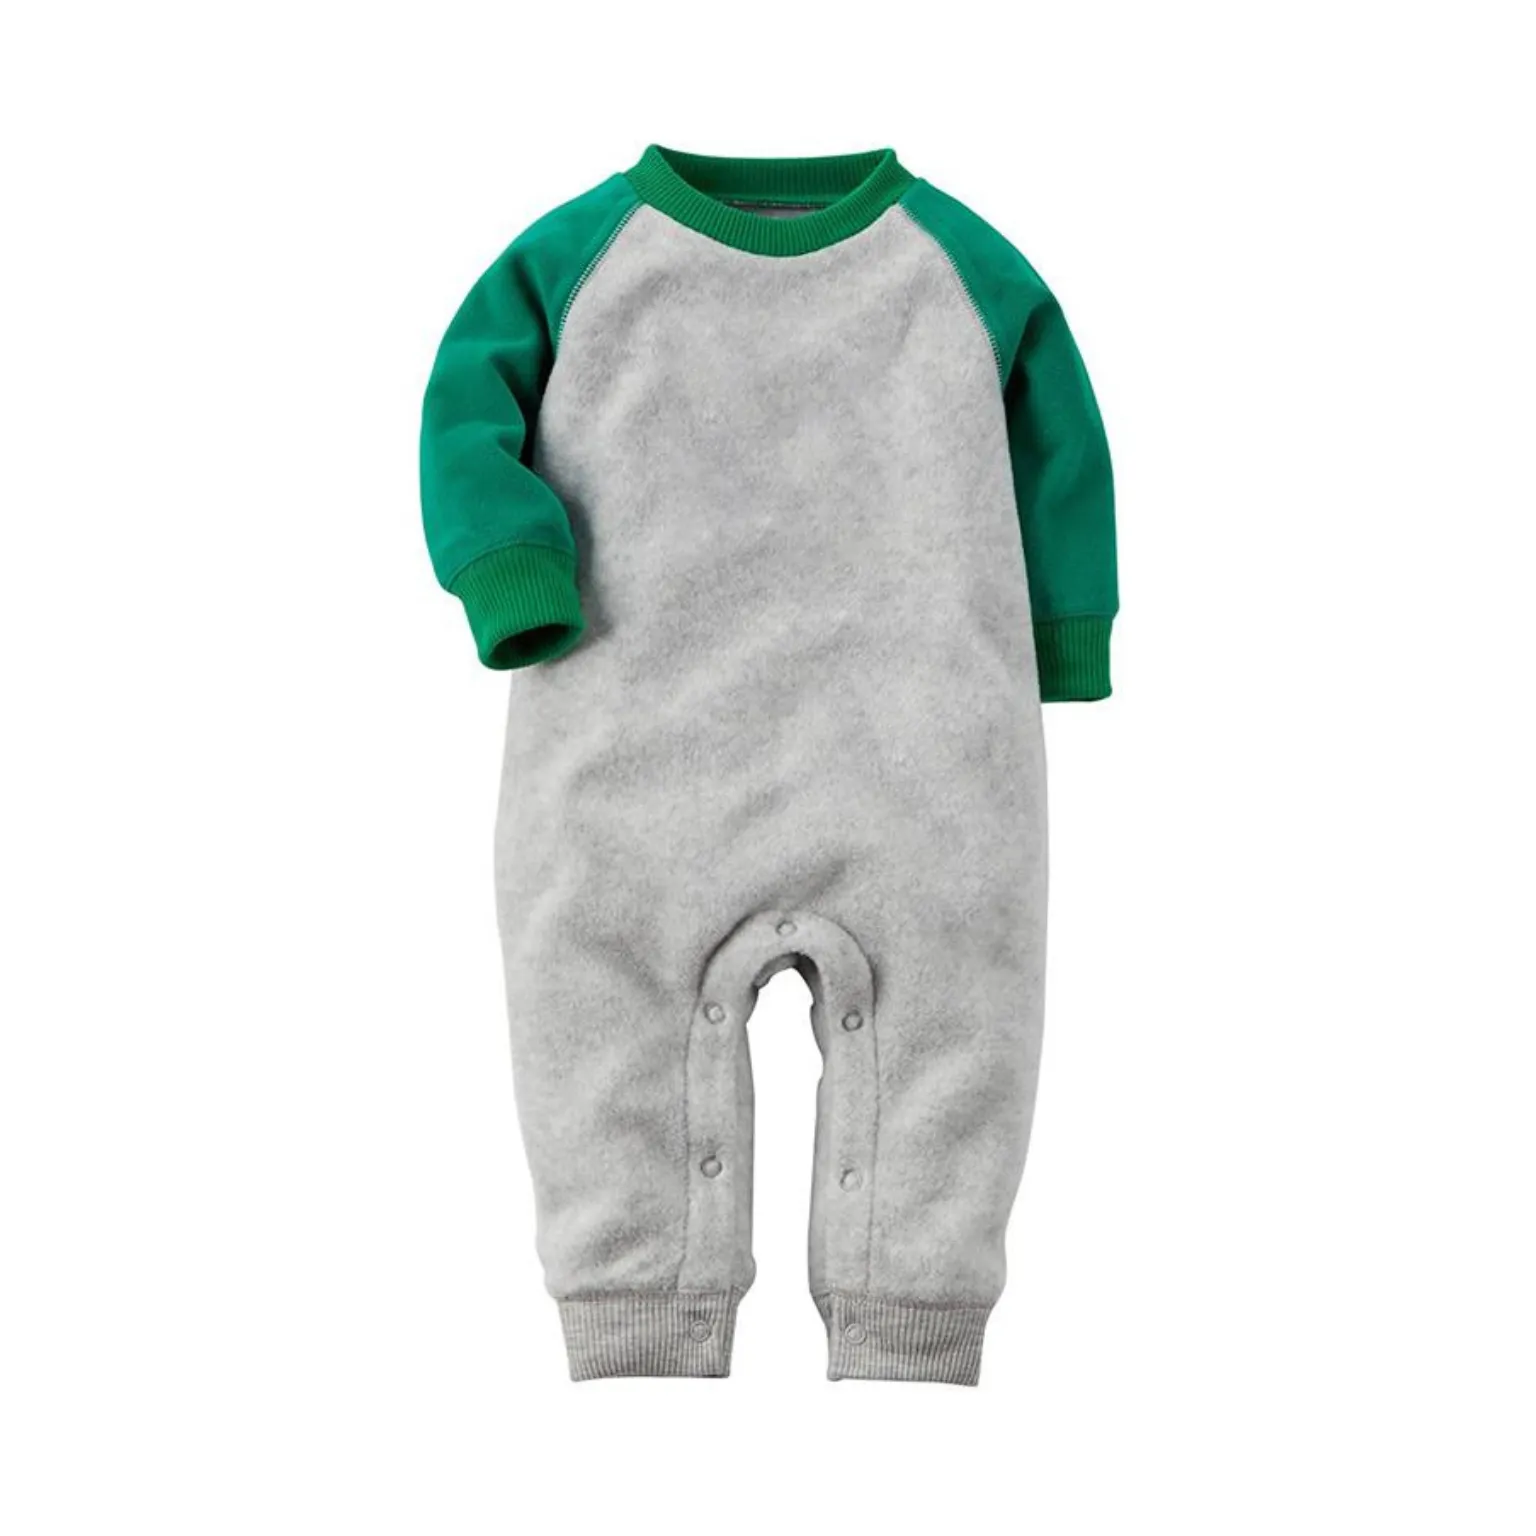 Raglan Jumpsuits manufacturing with innovative OEM/ODM service